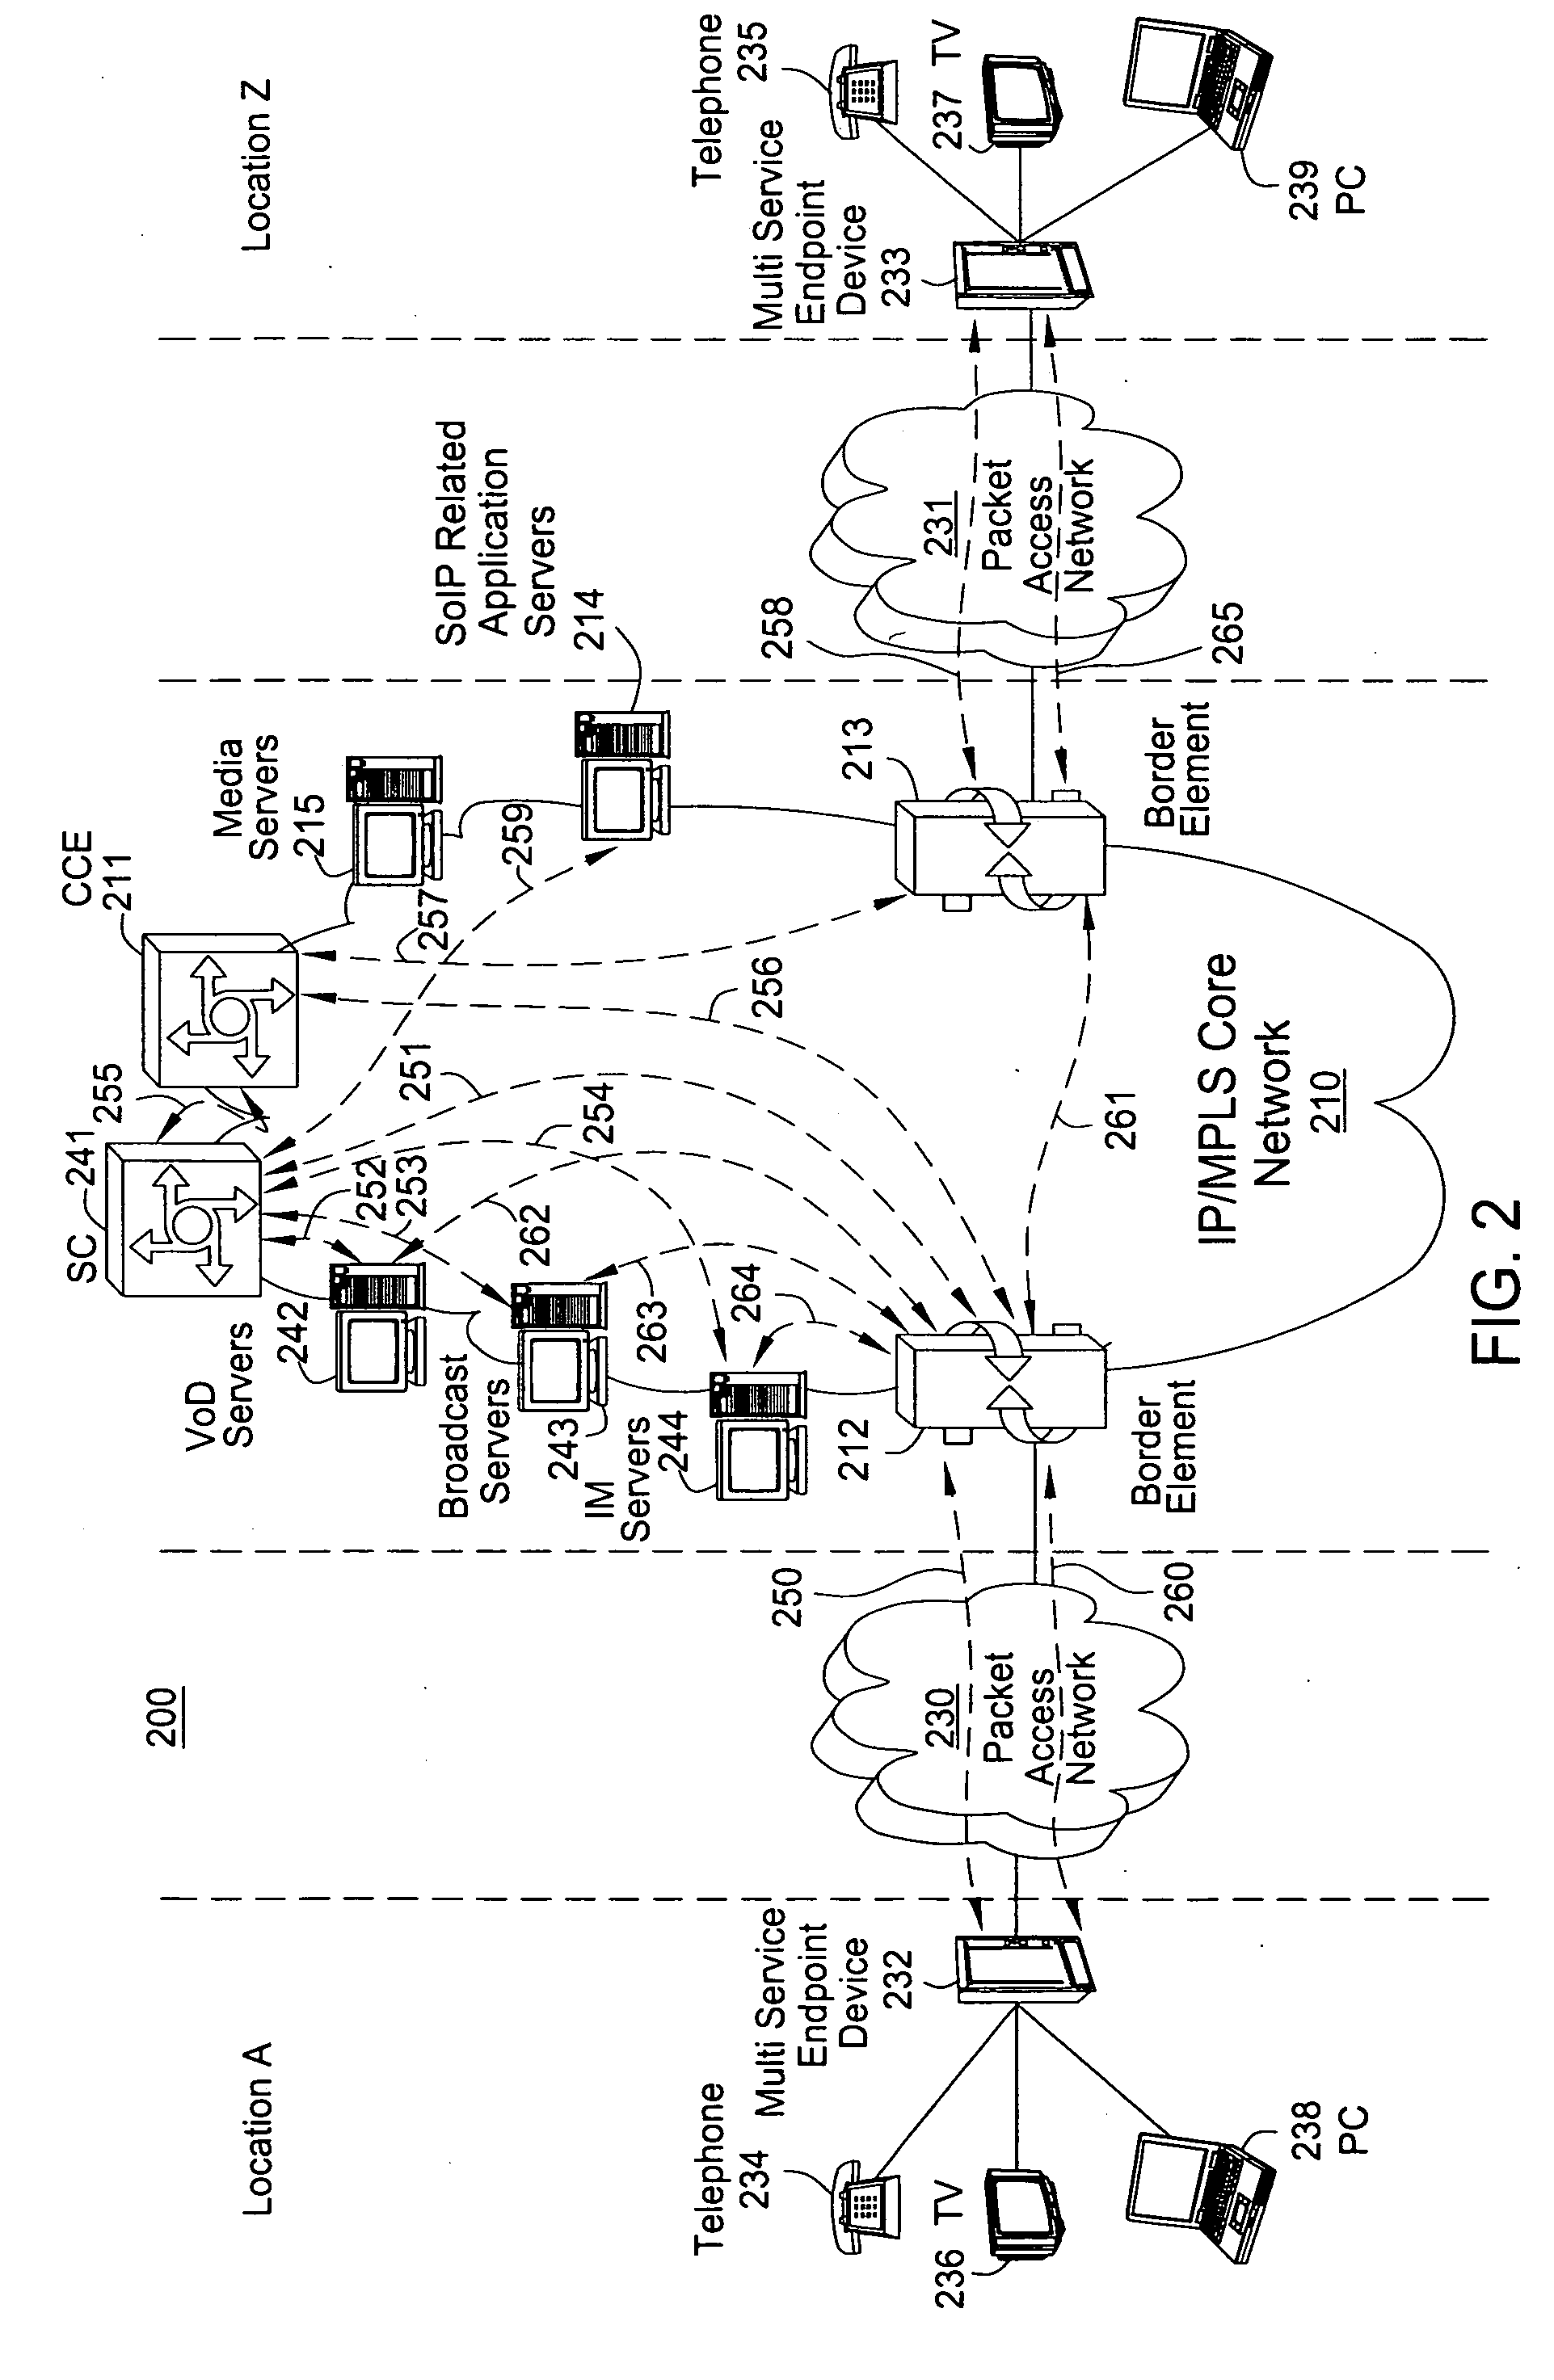 Method and apparatus for providing a click-to-talk service for advertisements